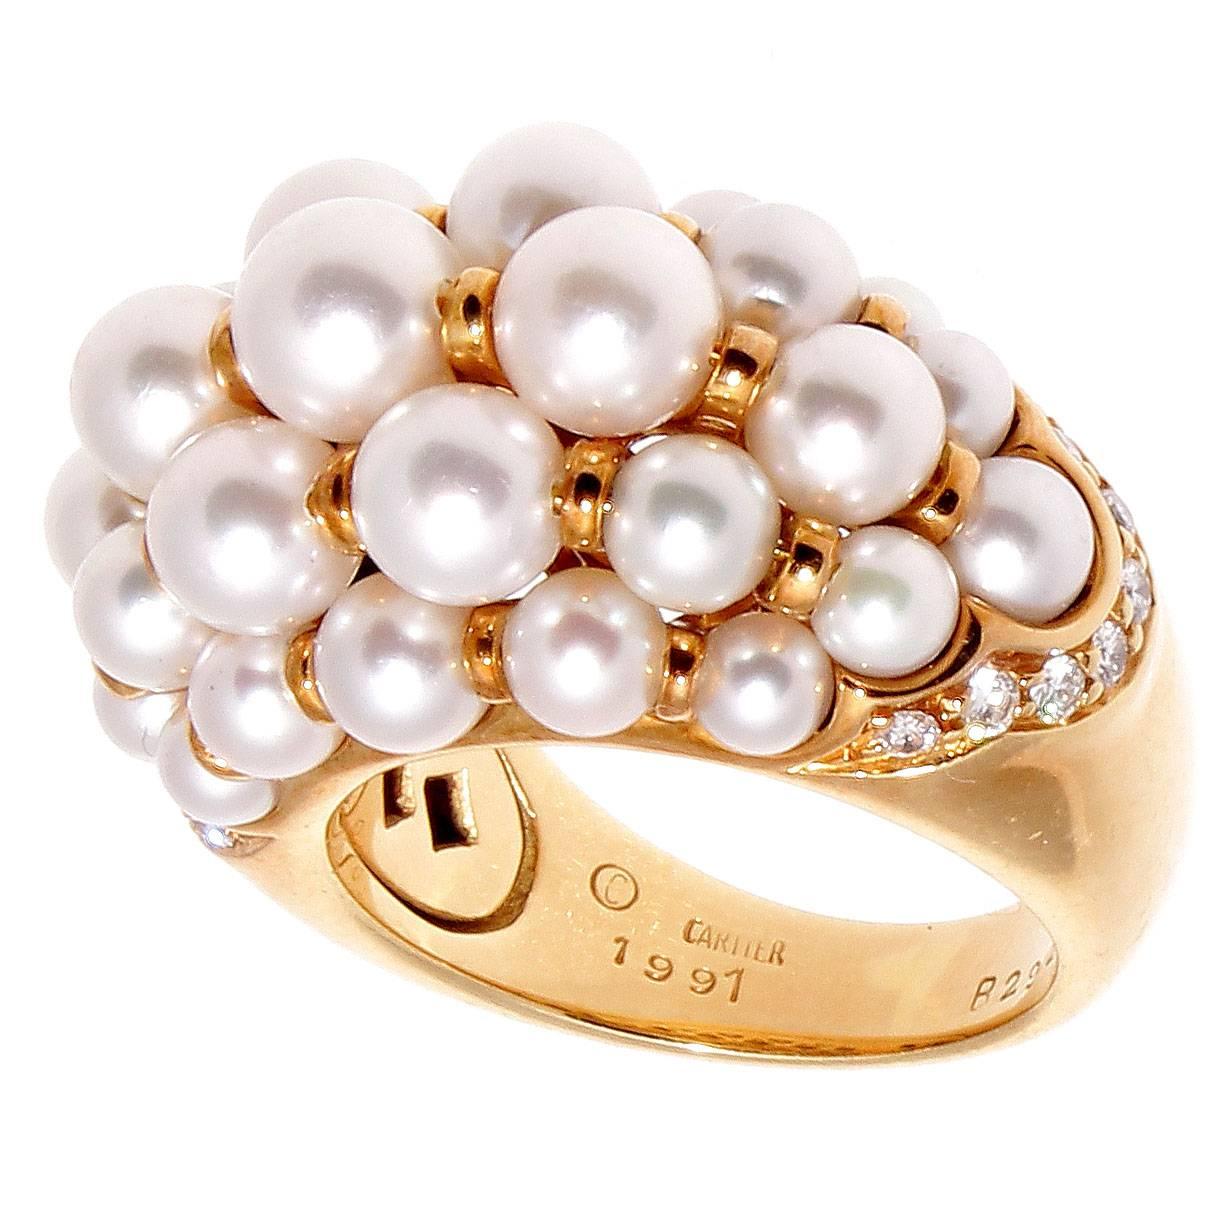 Cartier has a way to bring impossible to fruition. Pure white design to create this elegant ring that can be worn to the ball with a gown or to the grocery store with a pair of jeans. Featuring a dome of precious rich glowing white pearls that is